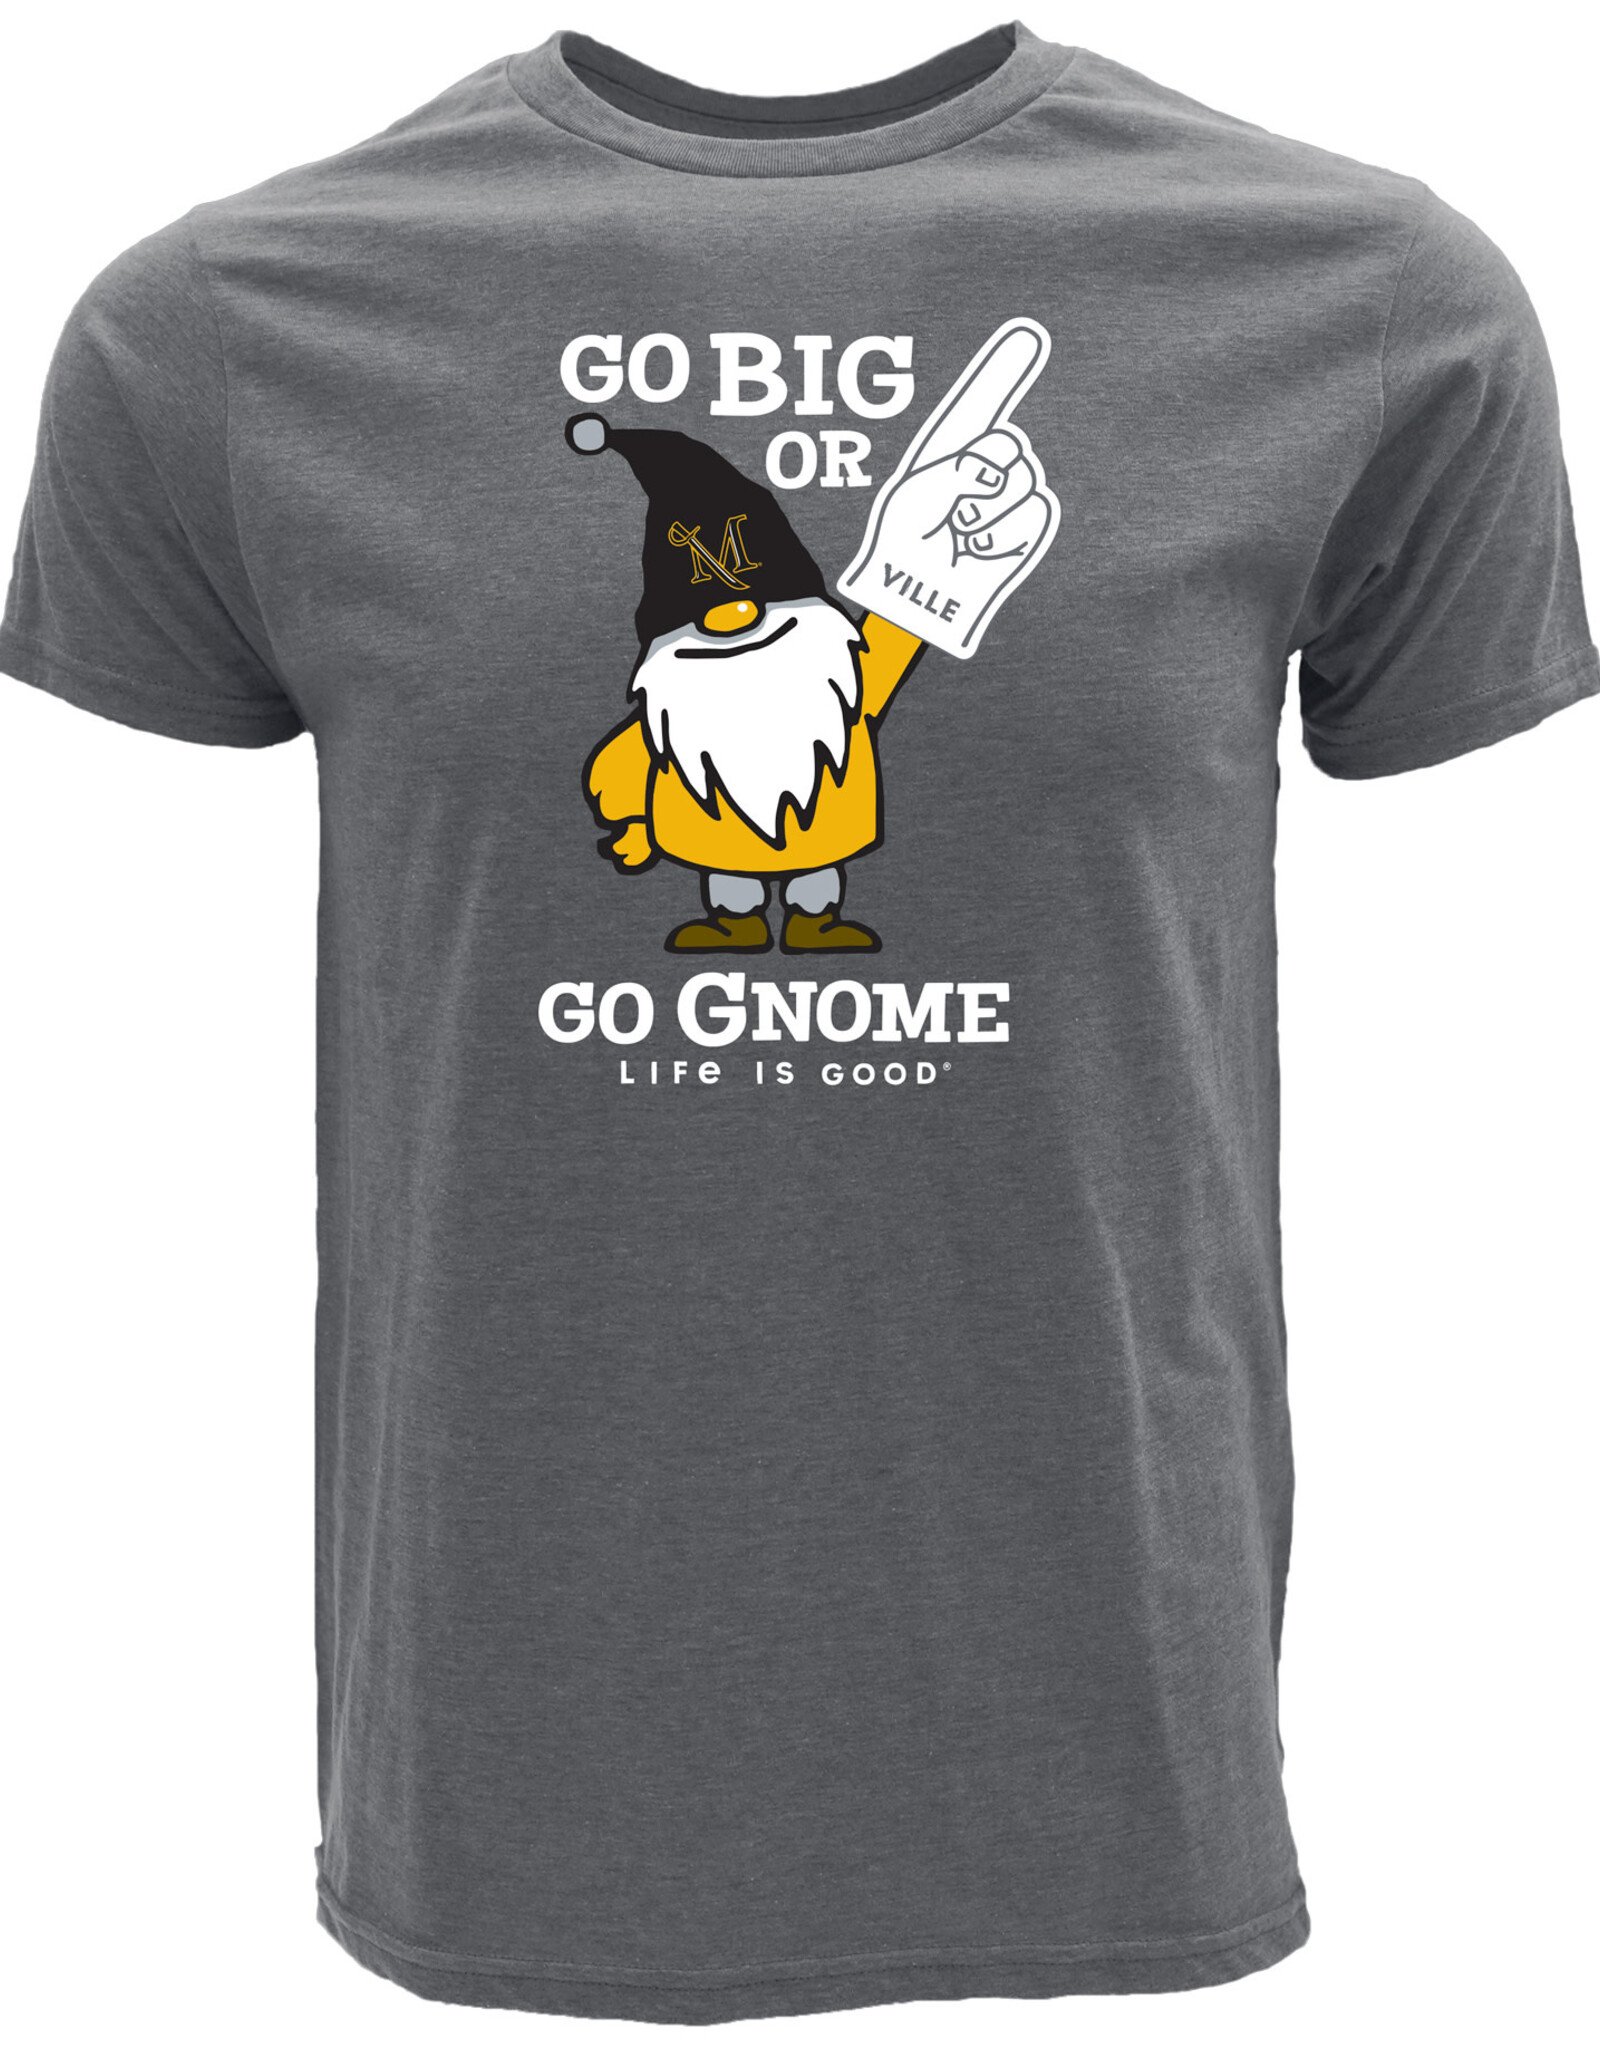 Life is Good Life is Good Go Big or Go Gnome Blend Tee - Heather Grey